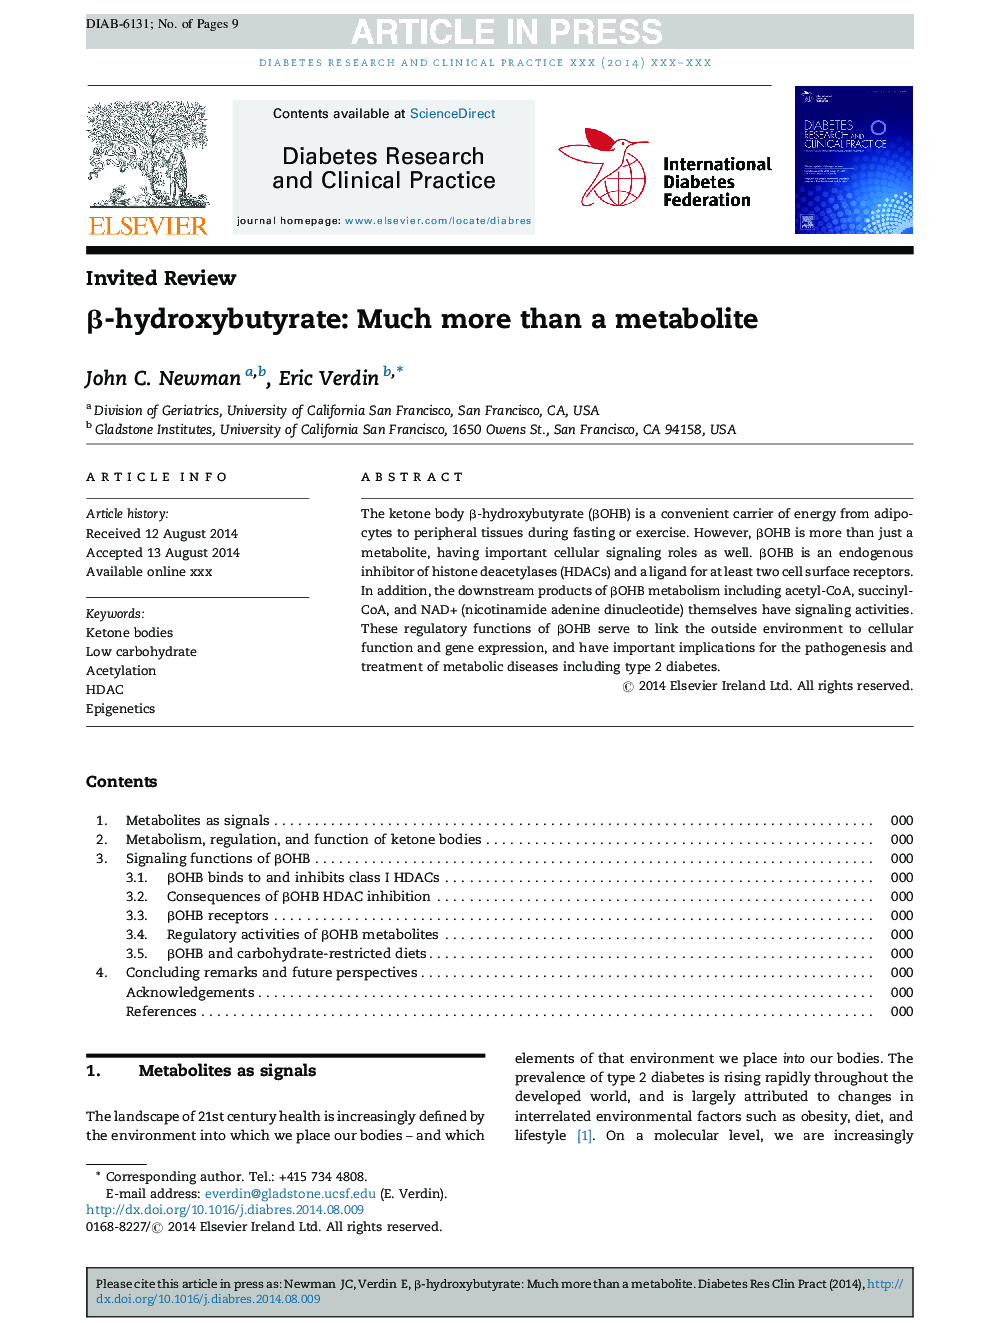 Î²-hydroxybutyrate: Much more than a metabolite